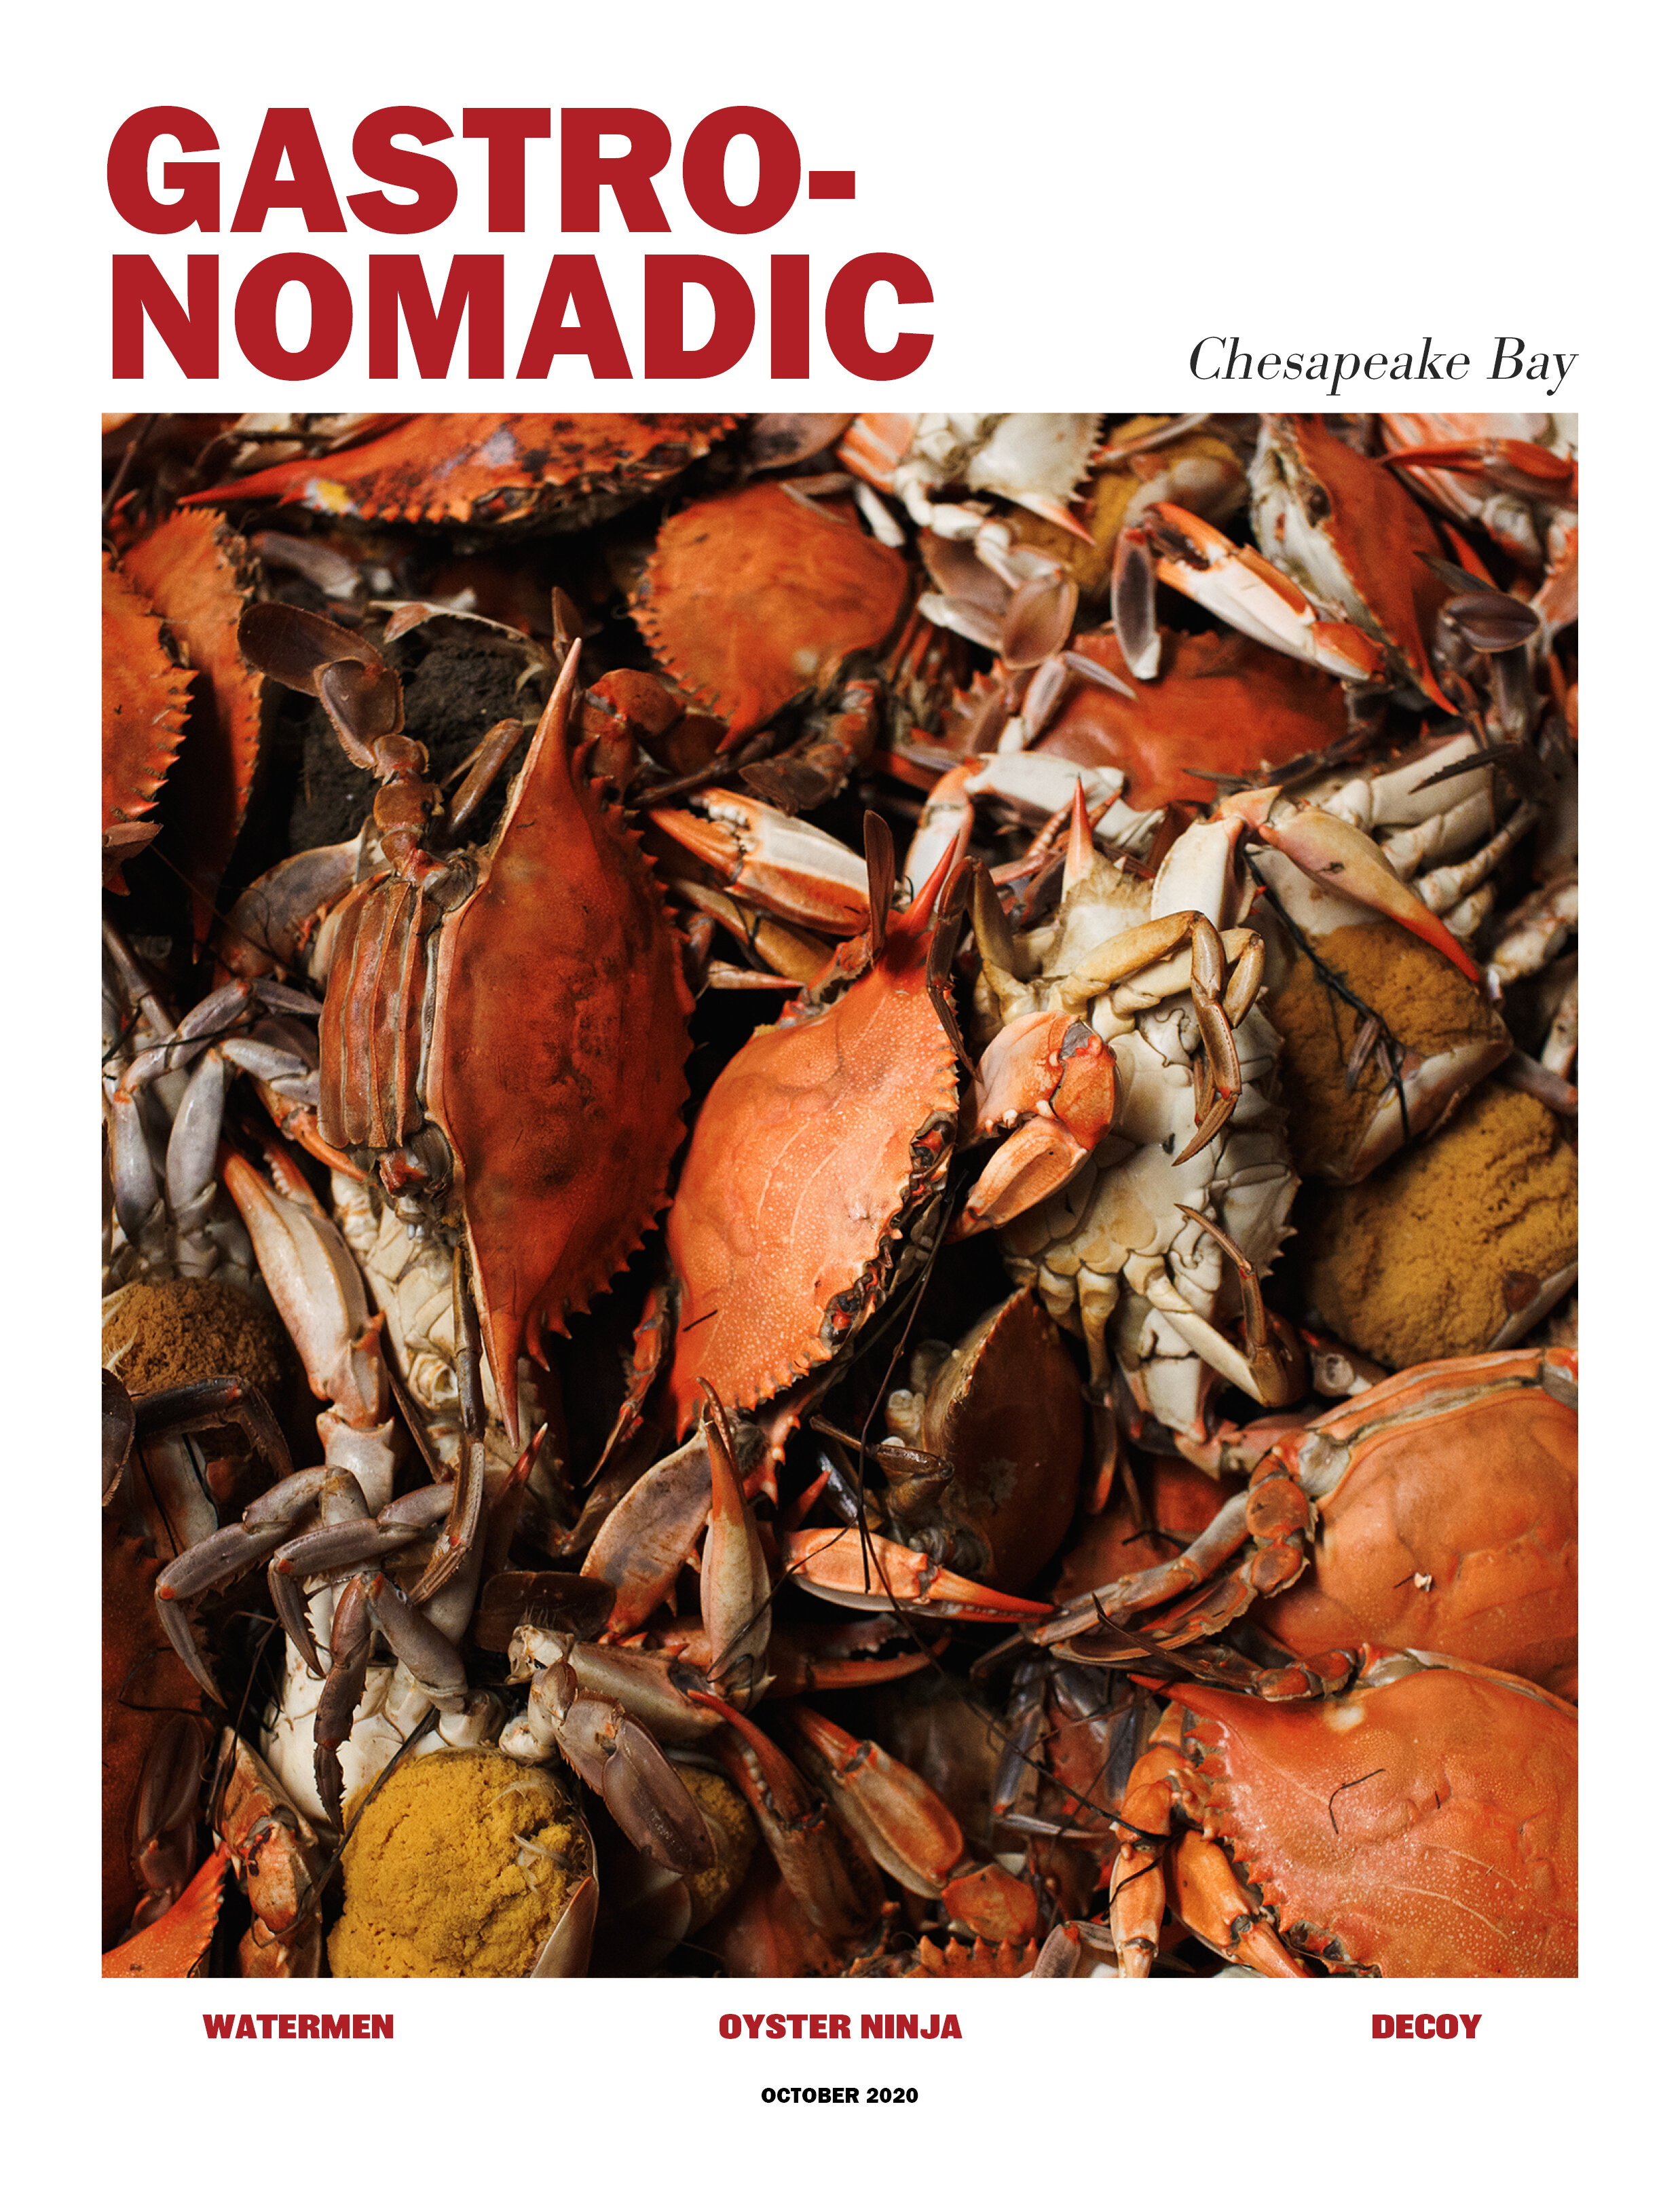  The Gastro-nomadic is a magazine promo: A recipe for cultural understanding through the culinary experience.   The Gastro-nomadic explores various regions, nations, cultures and social groups, discussing their socio-political issues, newsworthy even